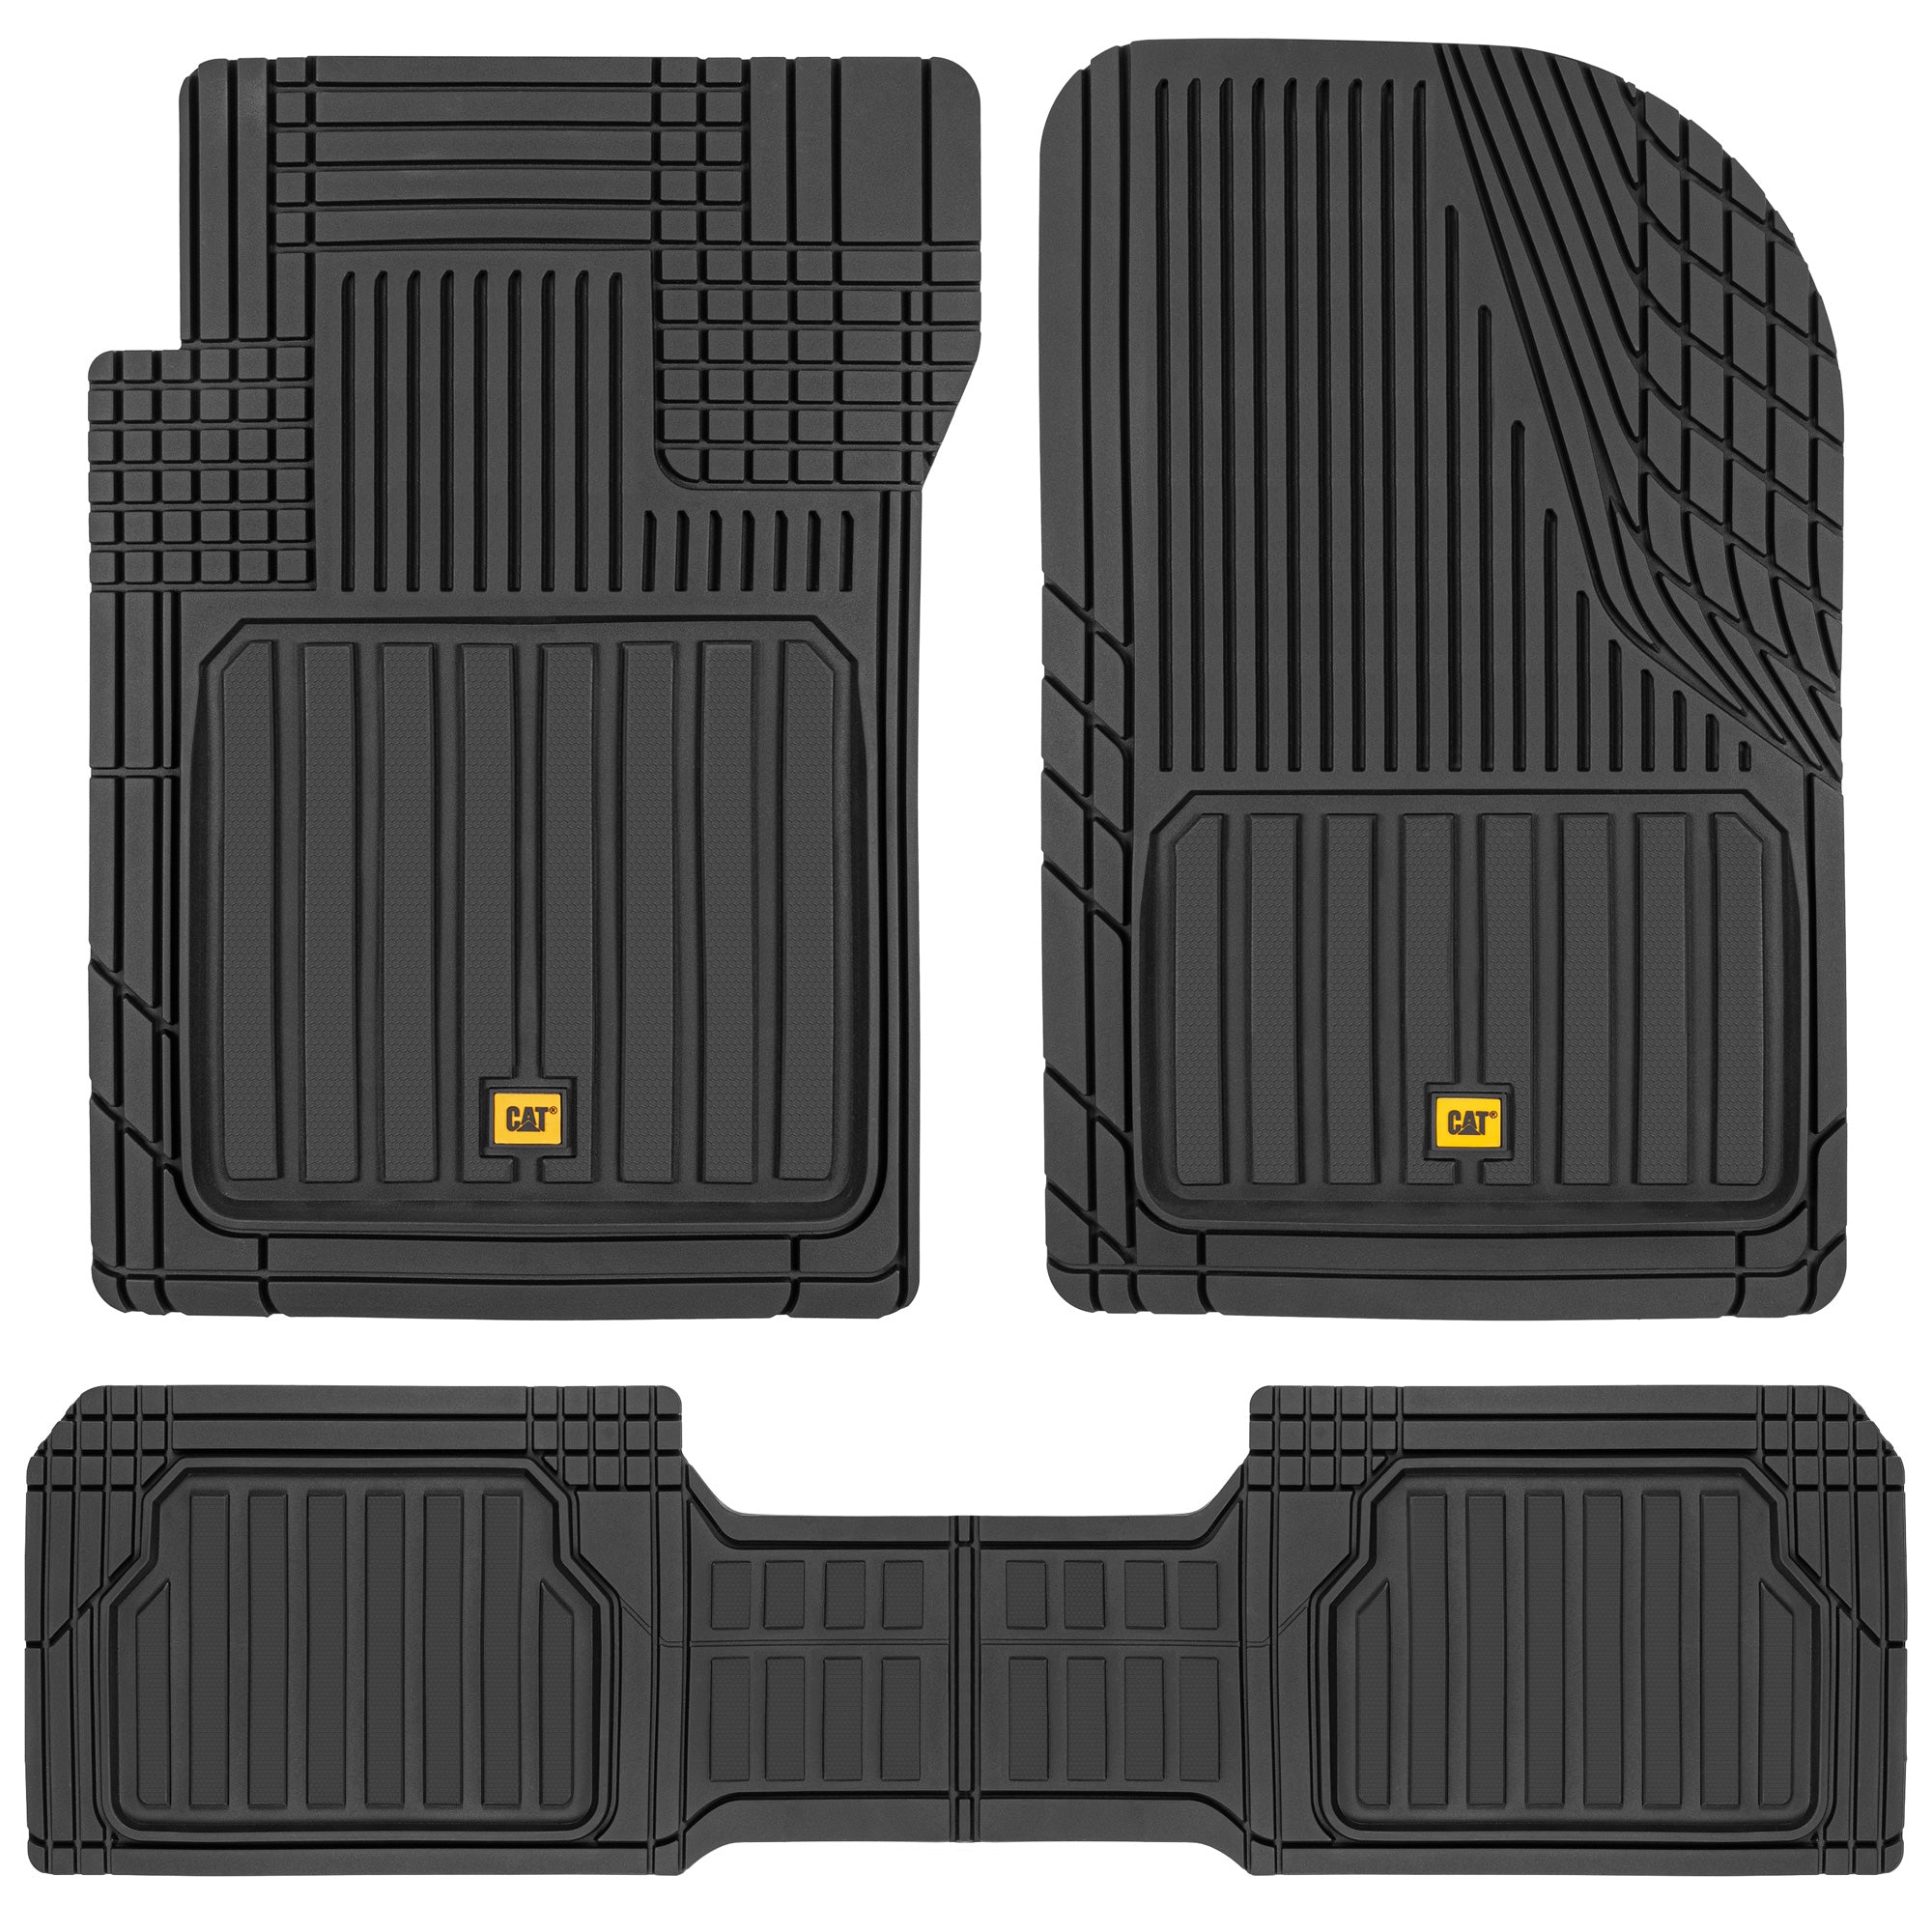 Cat® CAMT-8303 Heavy Duty Car Mats All Weather ToughLiner Floor Mat for Auto Truck SUV & Van, Full Custom Trim to Fit Rubber Liners, Total Protection, Beige - Beige:#D2B48C